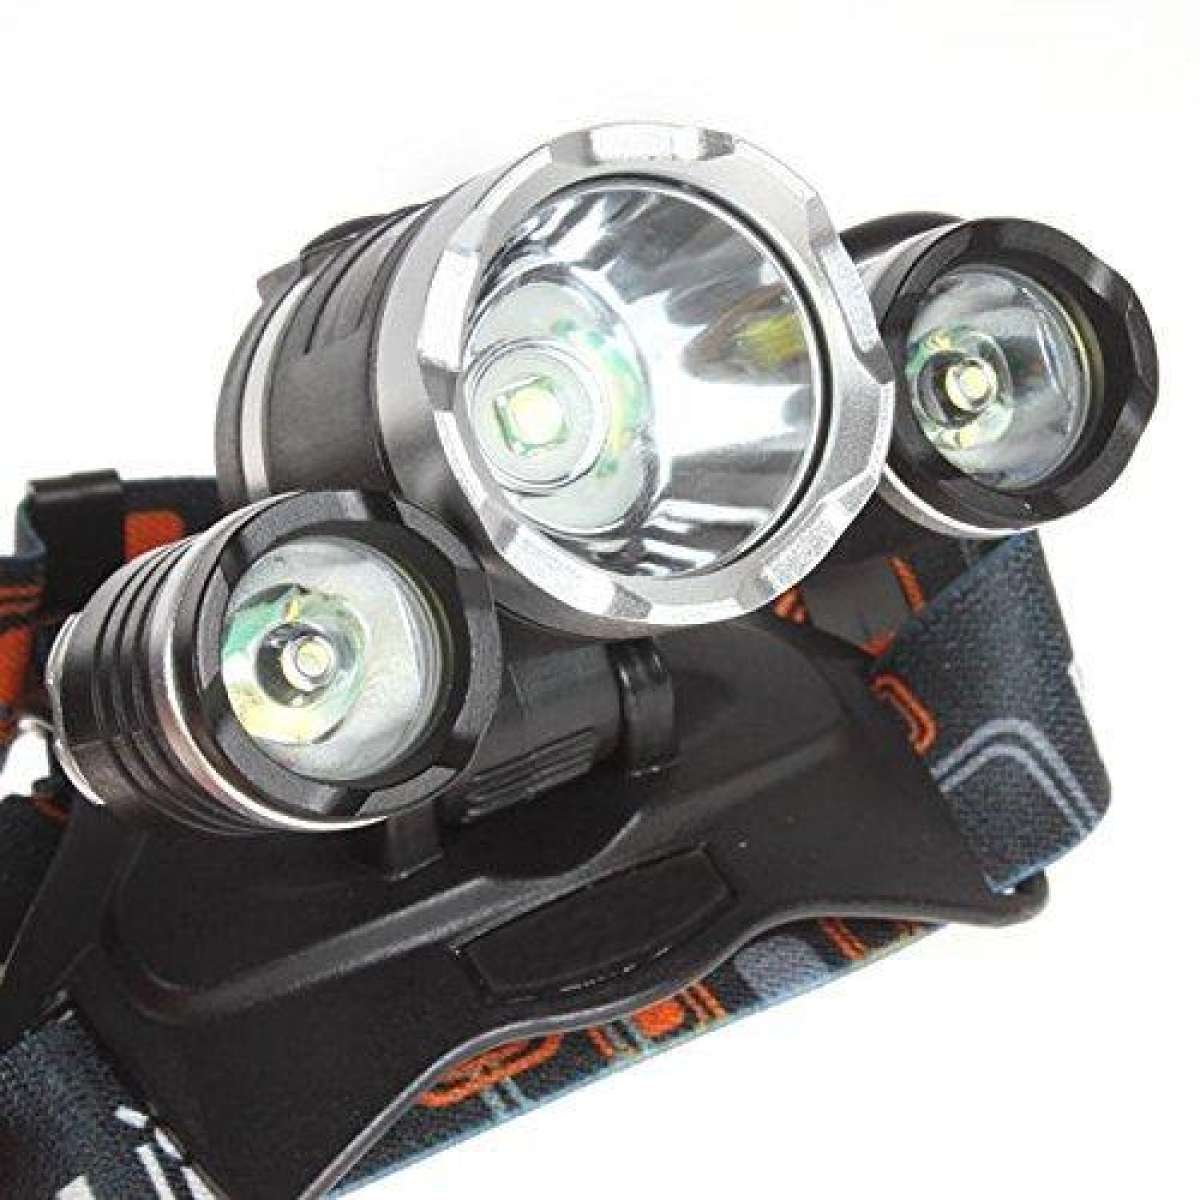 6000 Lumen High Power LED Headlamp, Rechargeable 3 CREE XM-L T6 Bright Headlights, Waterproof Head Flashlight for Outdoor